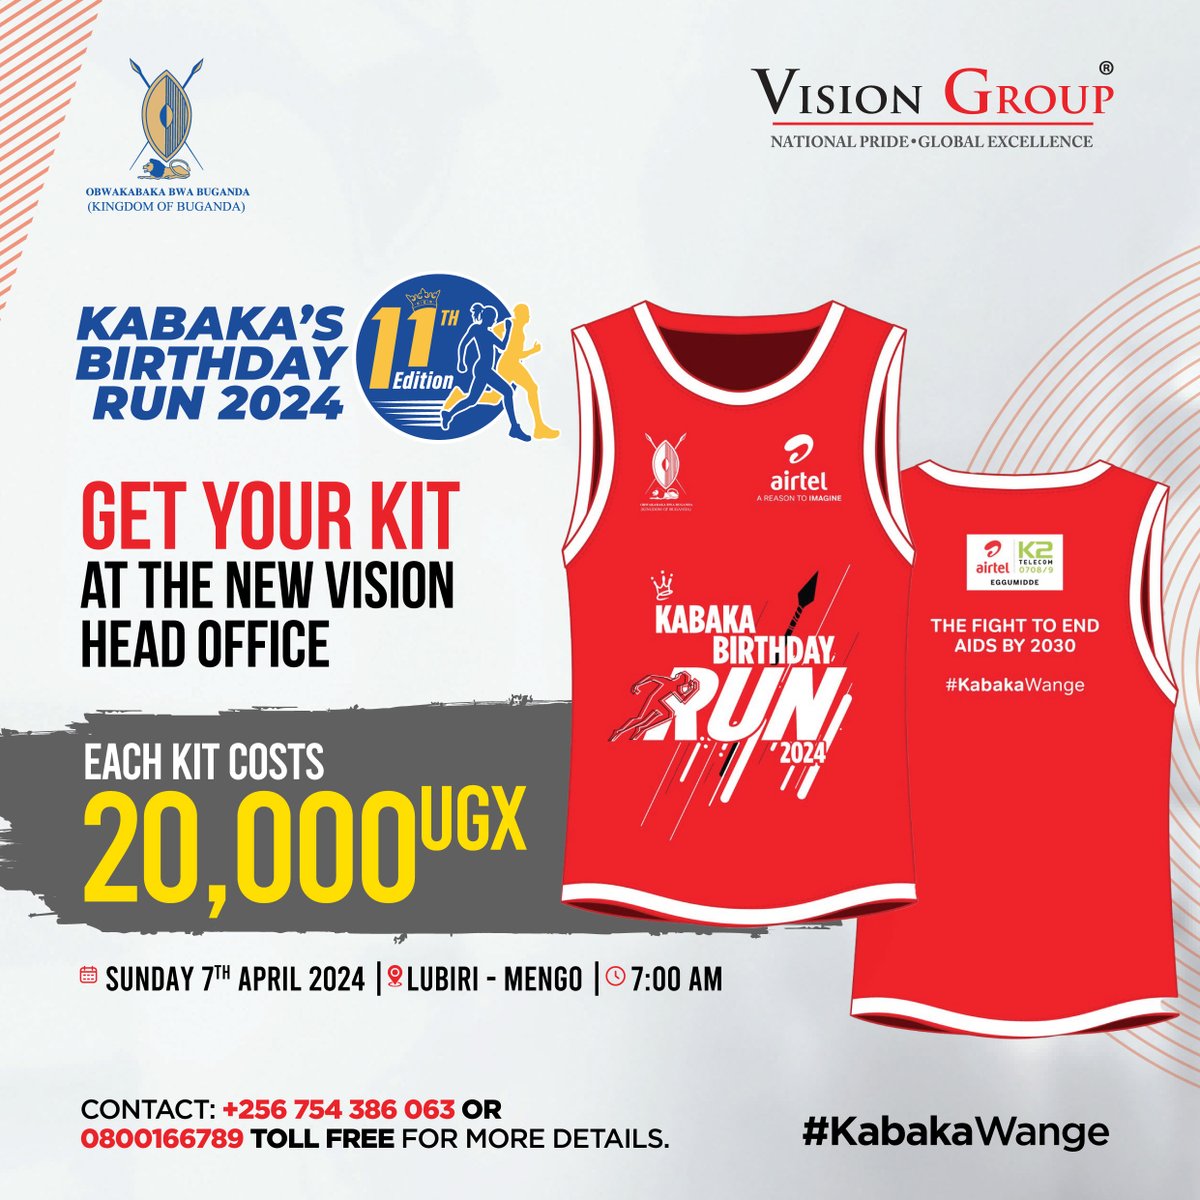 Have you heard? The Kabaka Birthday Run is TOMORROW! If you haven't prepared your kit yet, now's the time! Get ready to lace up those sneakers and join us for an unforgettable day. #KabakaBirthdayRun2024 #KabakaWange